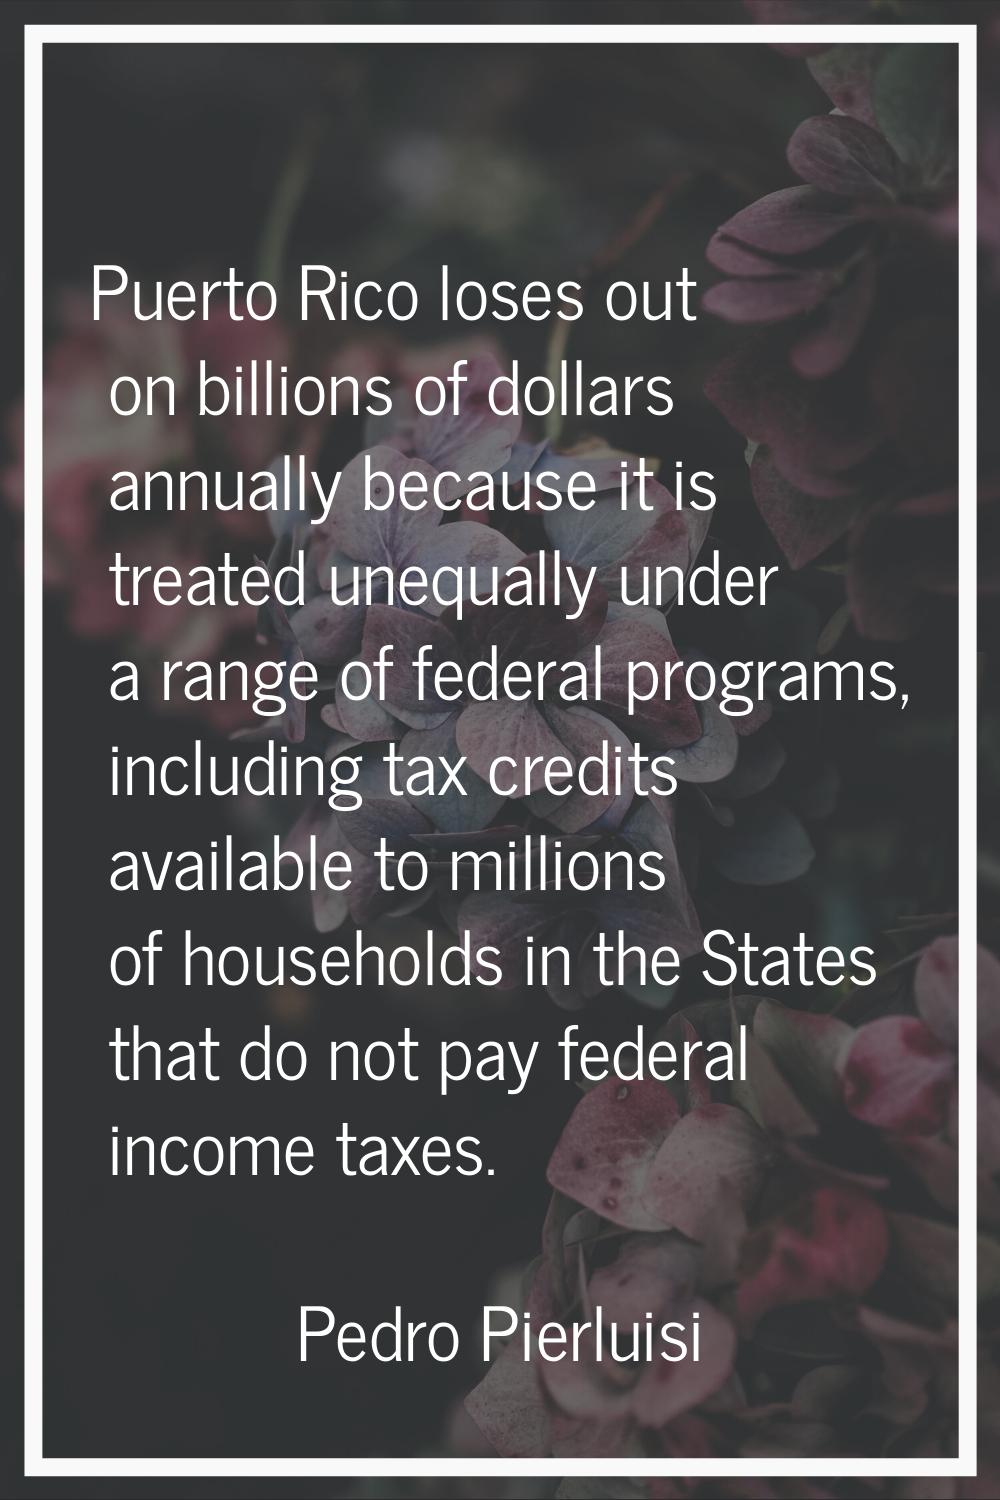 Puerto Rico loses out on billions of dollars annually because it is treated unequally under a range